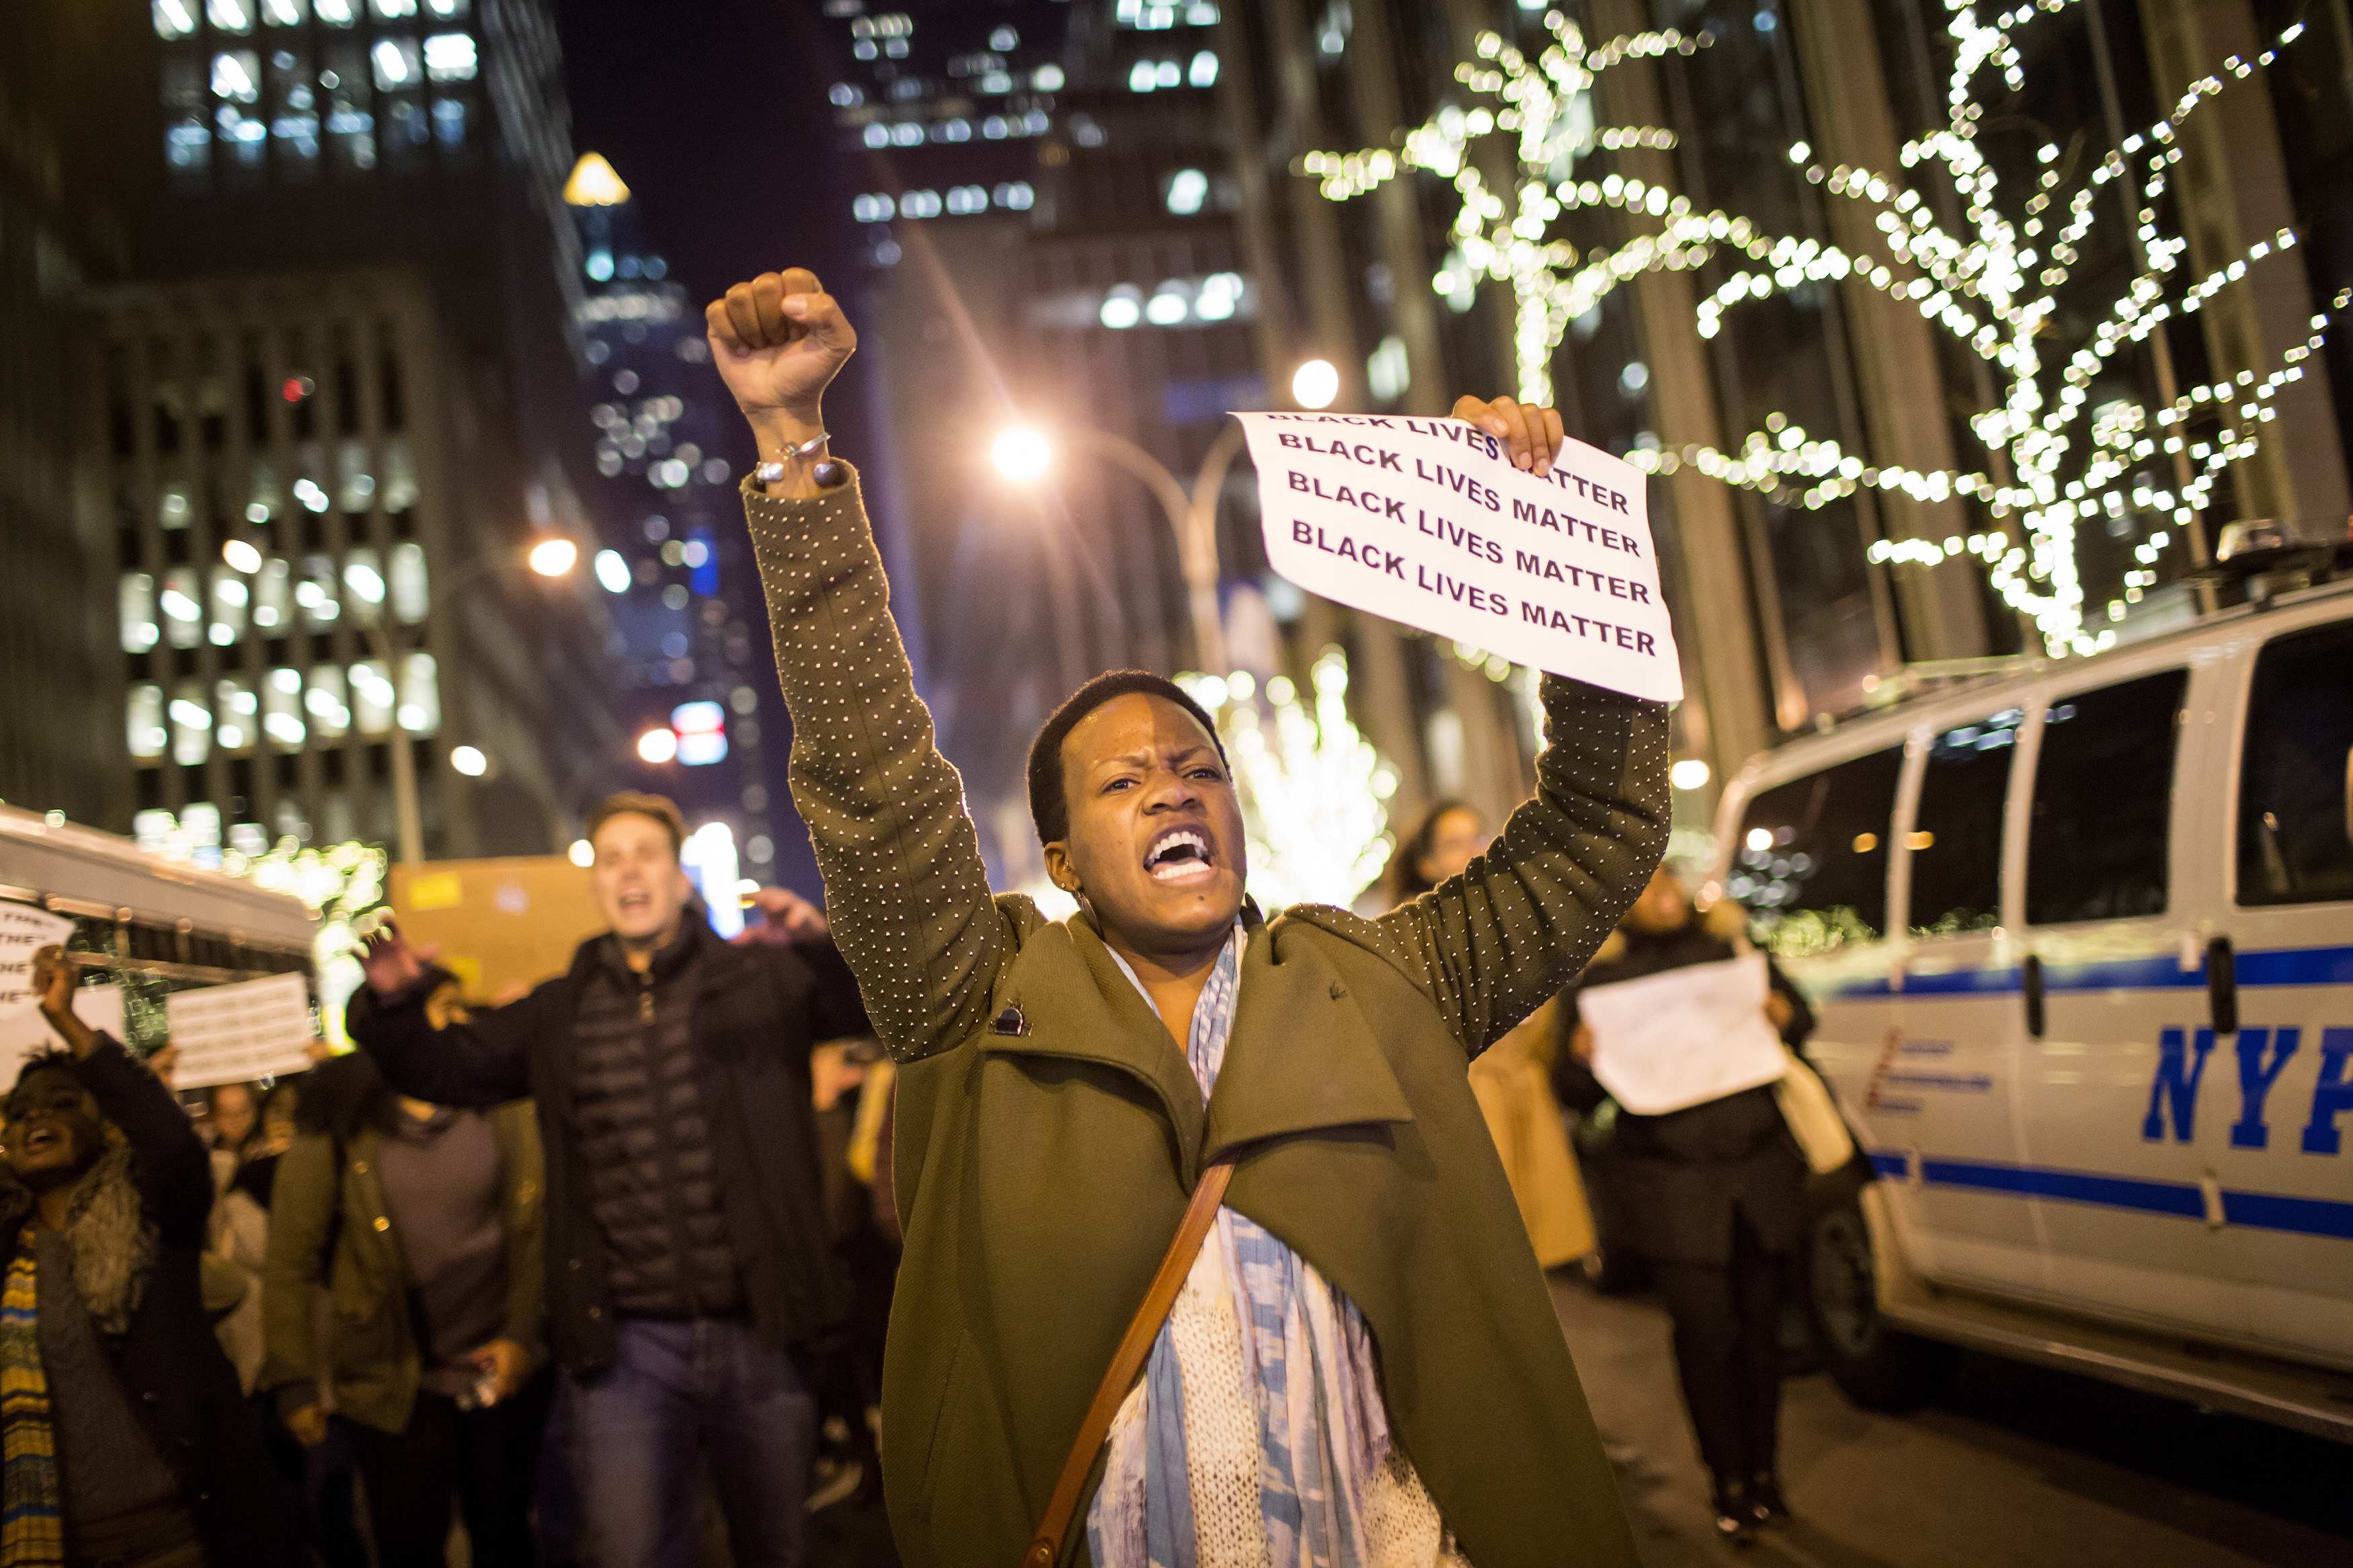 People take part in a protest against the grand jury decision on the death of Eric Garner in midtown Manhattan in New York on Dec. 3, 2014. (Eric Thayer—Reuters)